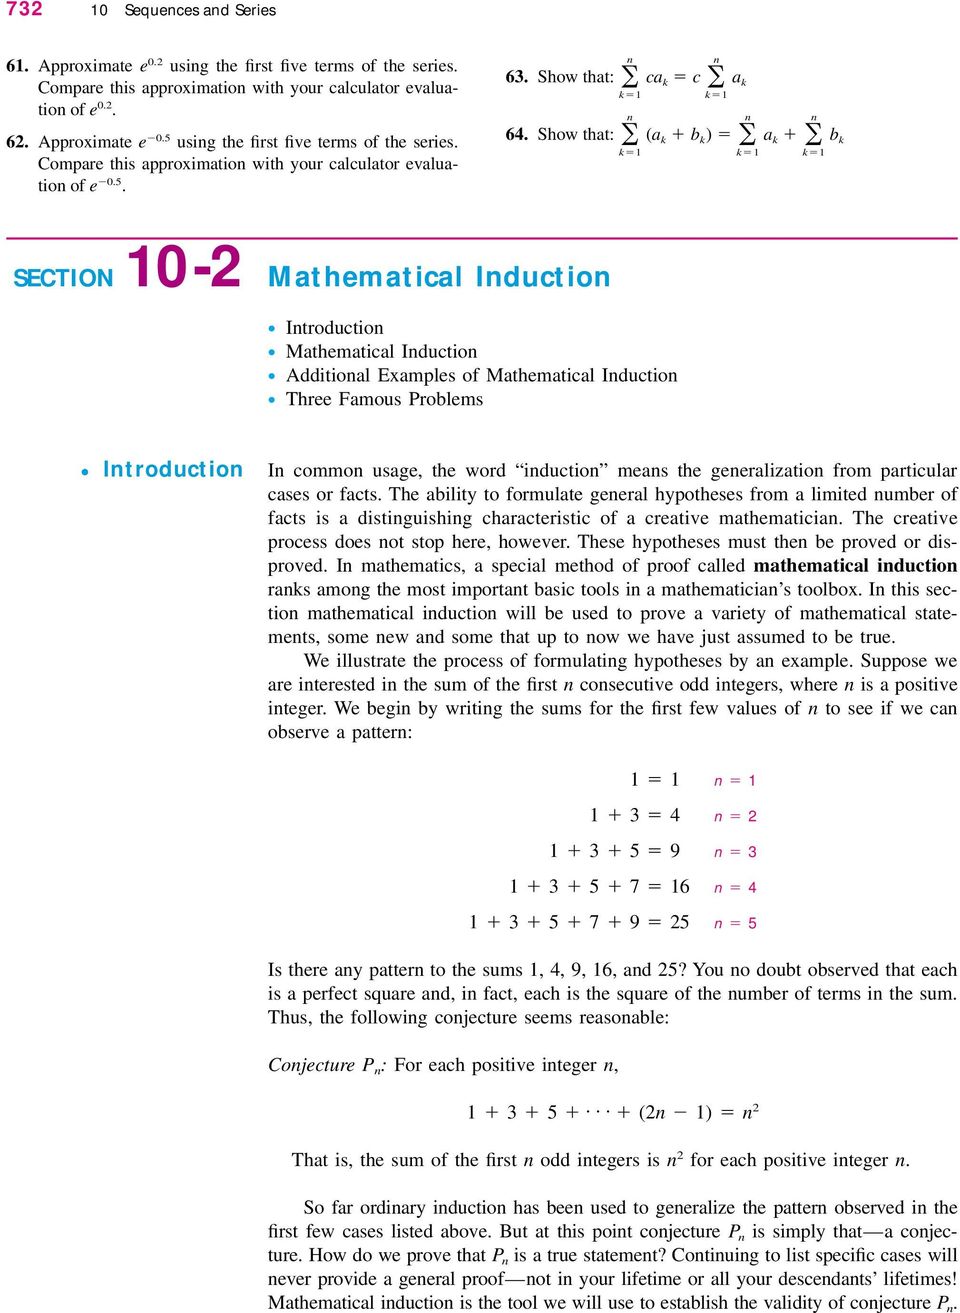 Show that: n k ca k c n a k k (a k b k ) n k a k n b k k SECTION 0- Mathematical Induction Introduction Mathematical Induction Additional Examples of Mathematical Induction Three Famous Problems